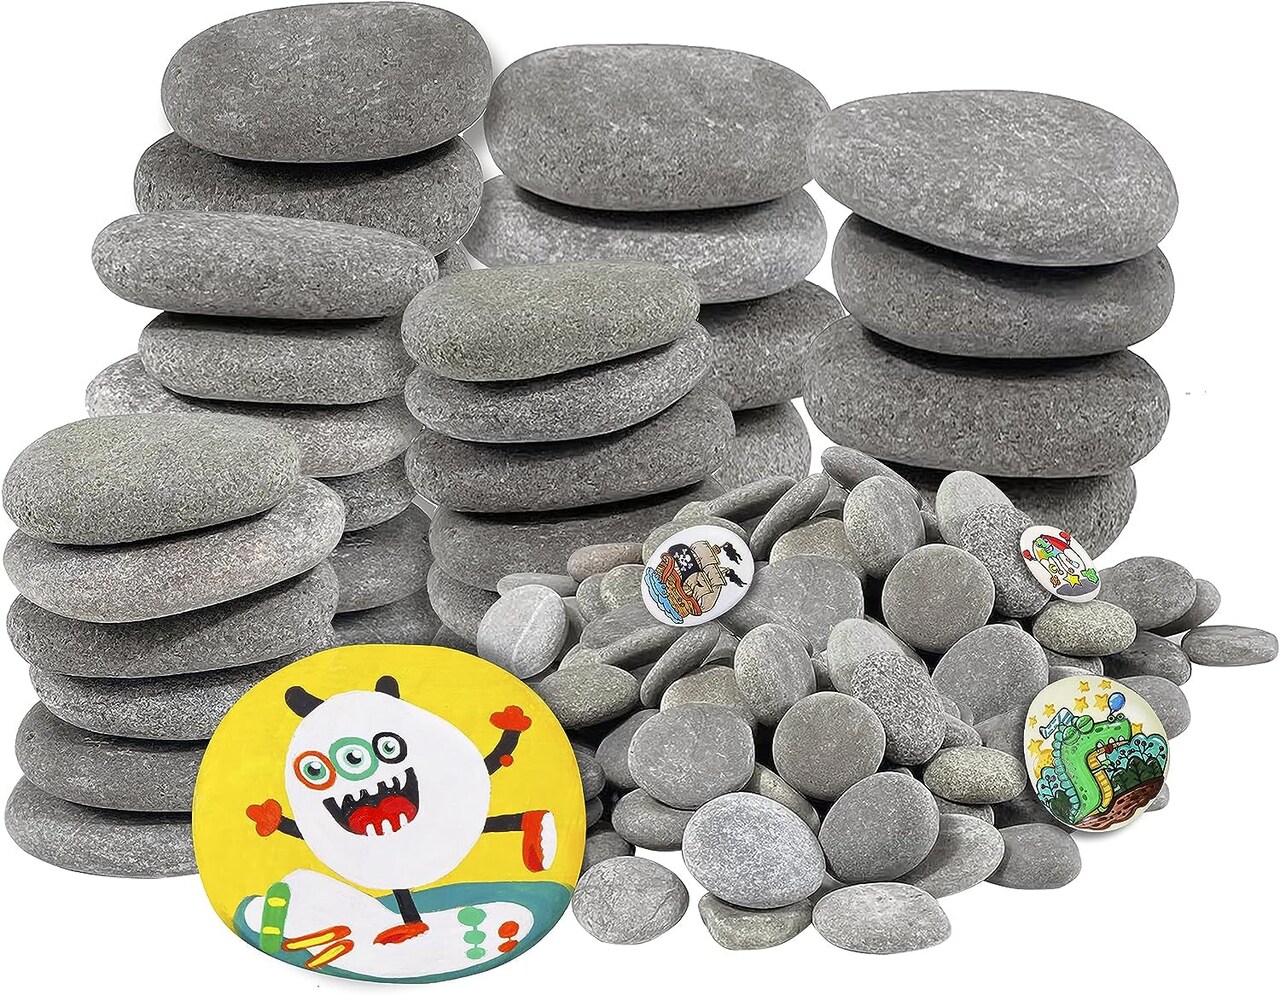 20PCS Large Rocks,Natural River Flat Rocks for Painting, 2-3 Inches  Stones for Arts & Craftingt